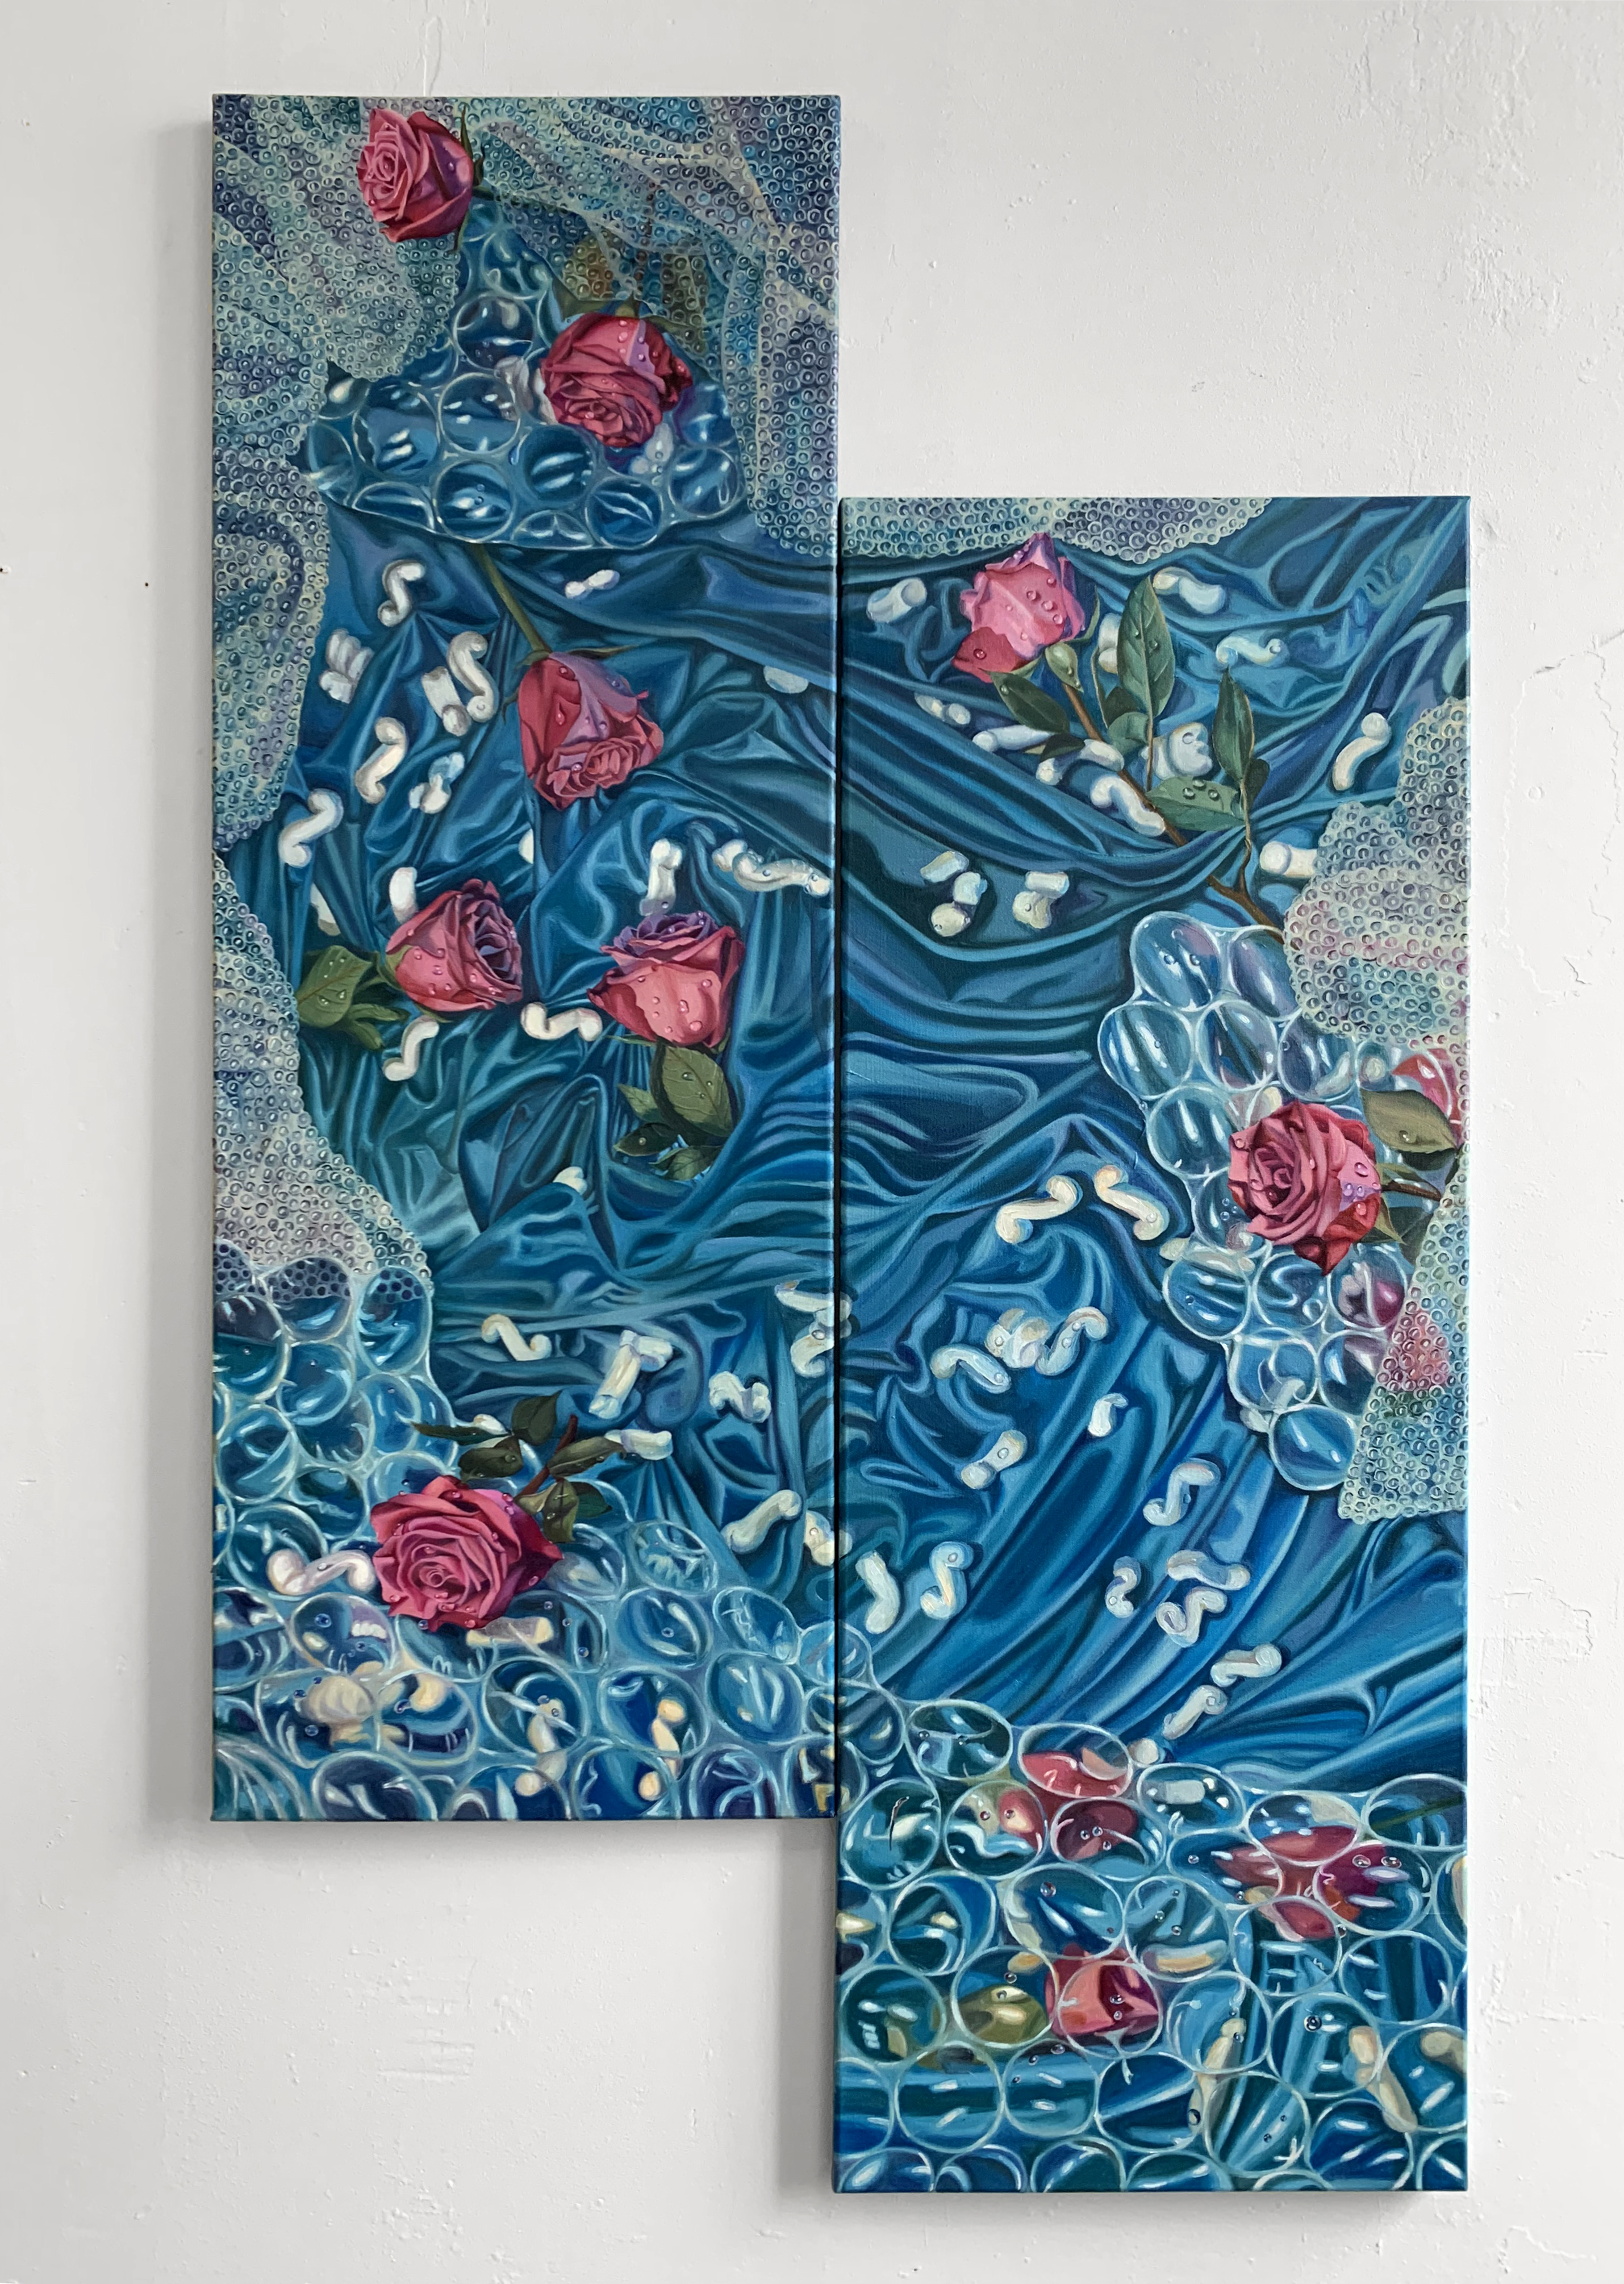 Heavy Surf (Diptych), 40x15 & 40x15 2021 <br>oil on canvas<br><br>I work in an art storage warehouse that houses giant art. We fill two construction dumpsters with discarded polyethylene plastic and foam, twice a week. This piece is me thinking about how the same packaging that protects fine art beauty is destructive to natural beauty.